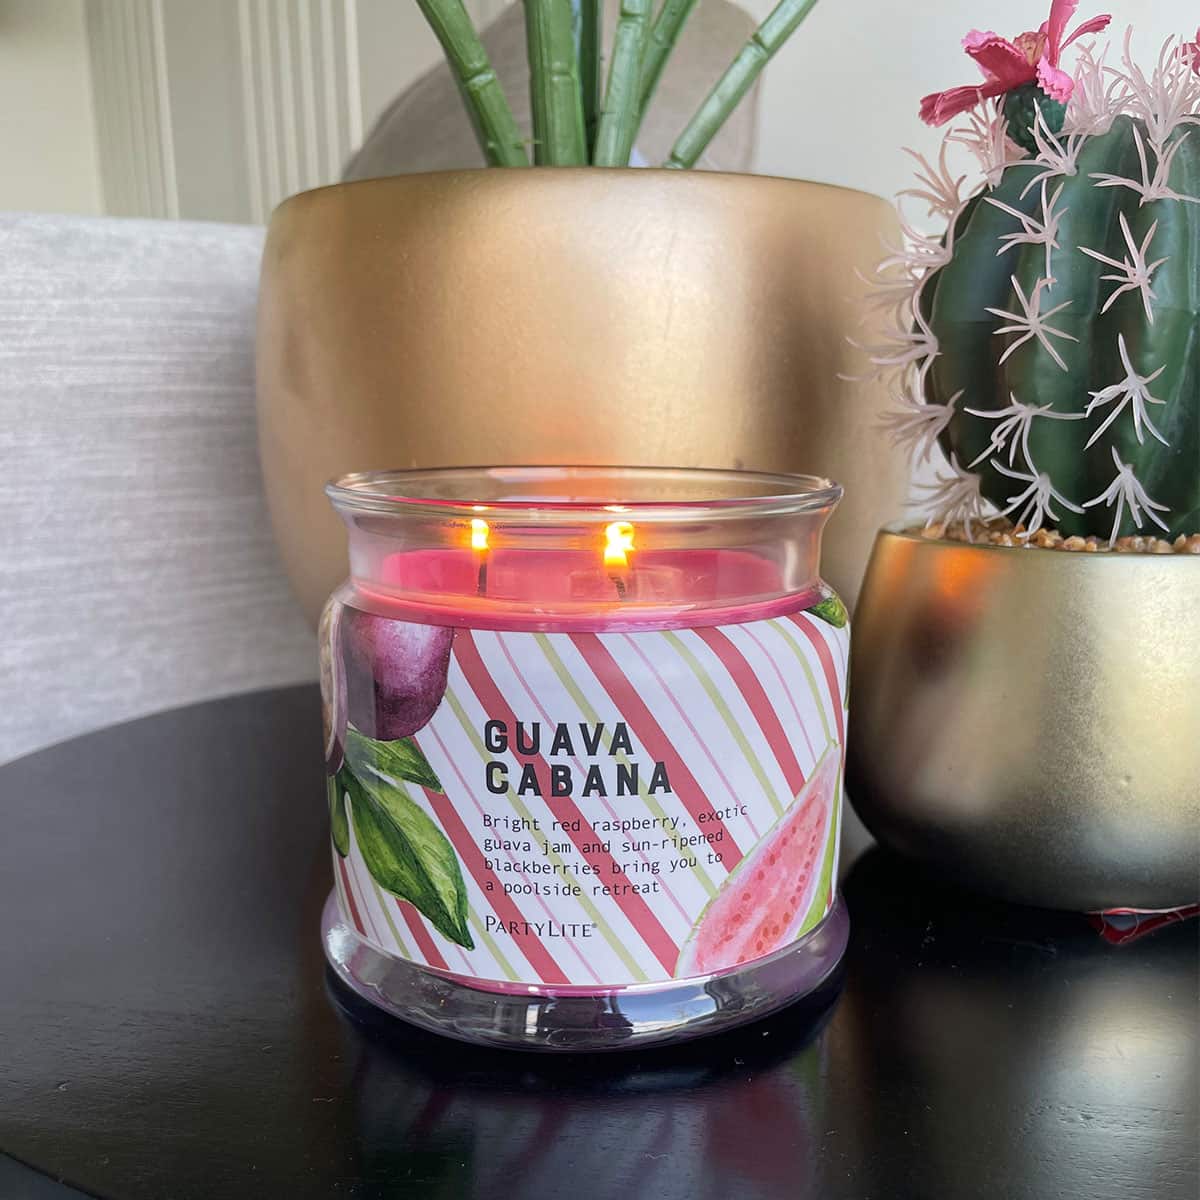 Guava Cabana 3-Wick Jar Candle - PartyLite US